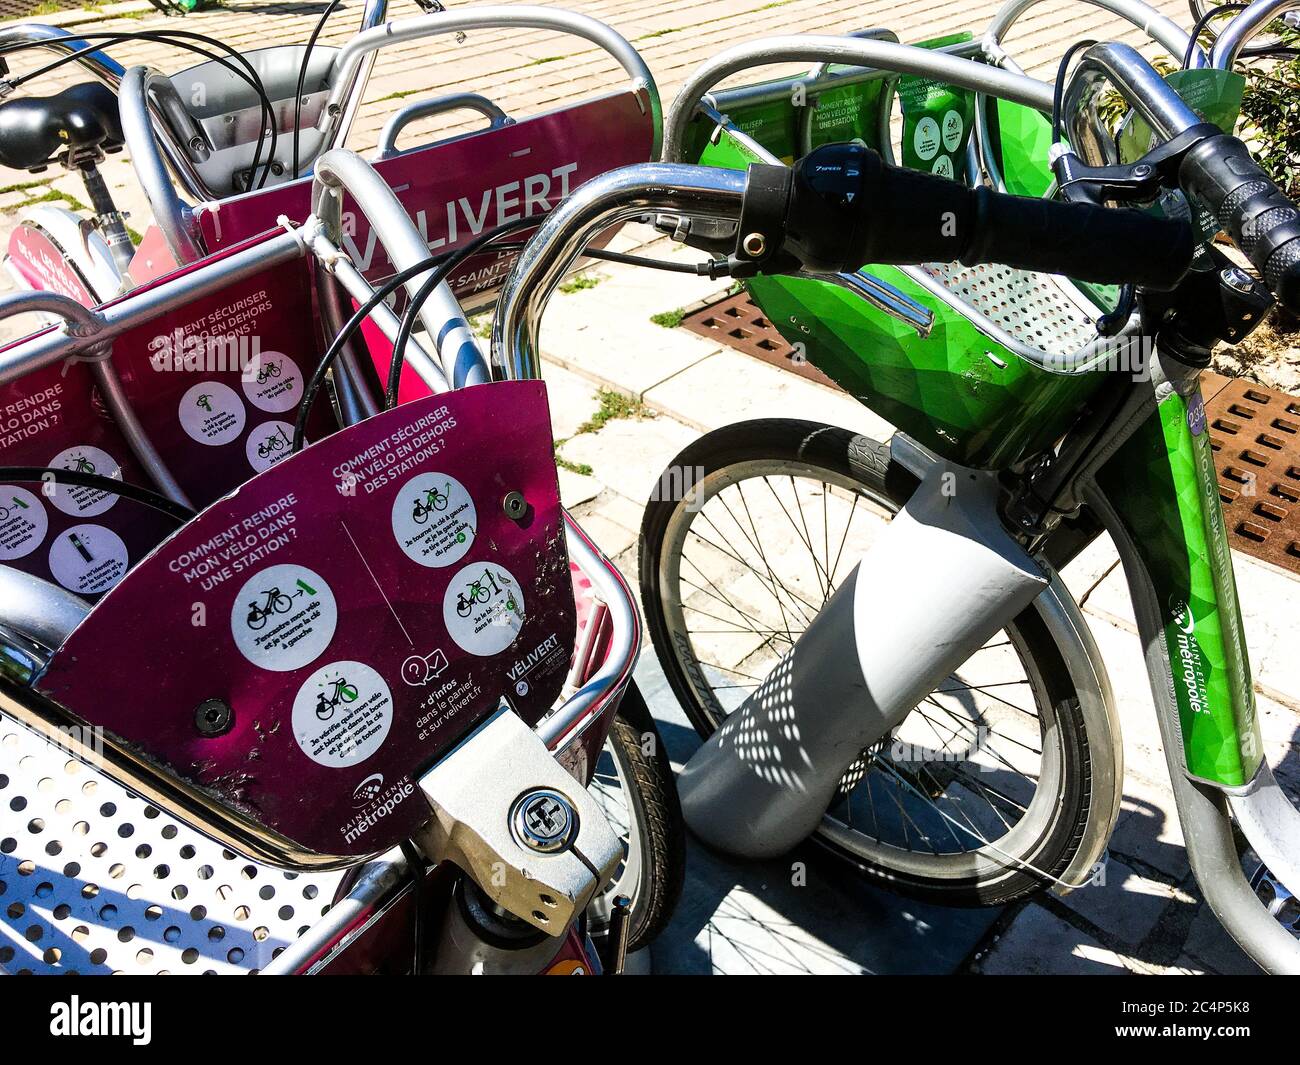 Velivert bicycle sharing station, Saint-Etienne, Loire, France Stock Photo  - Alamy